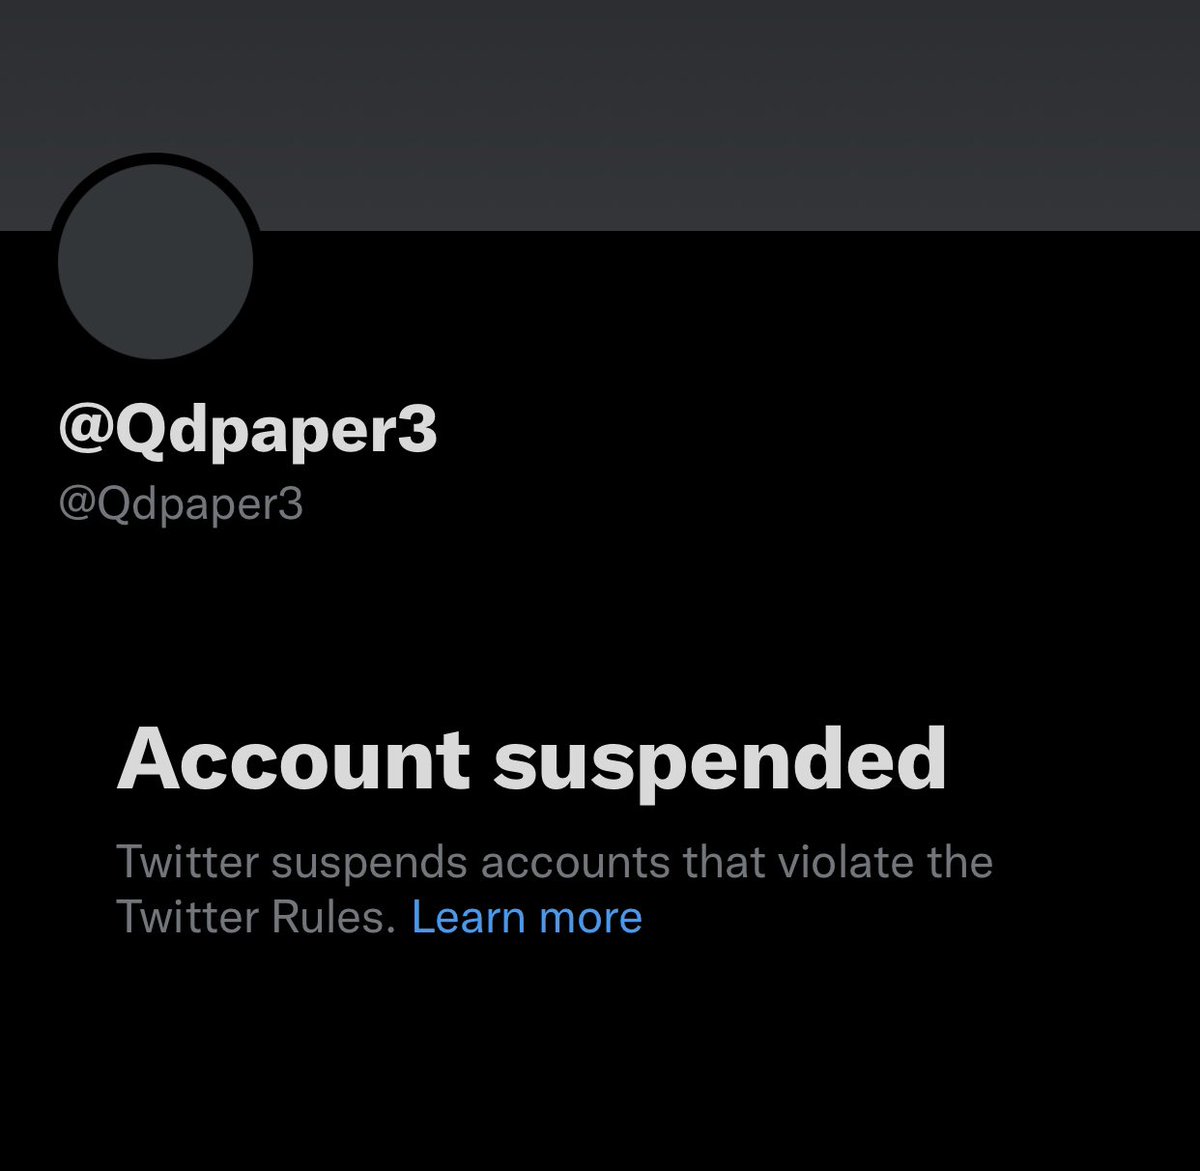 Fallen angels of Lucifer.

@Qdpaper2 @Qdpaper3 both accounts suspend..

ah AKANBI you must learn a lesson.
 @NgLabour